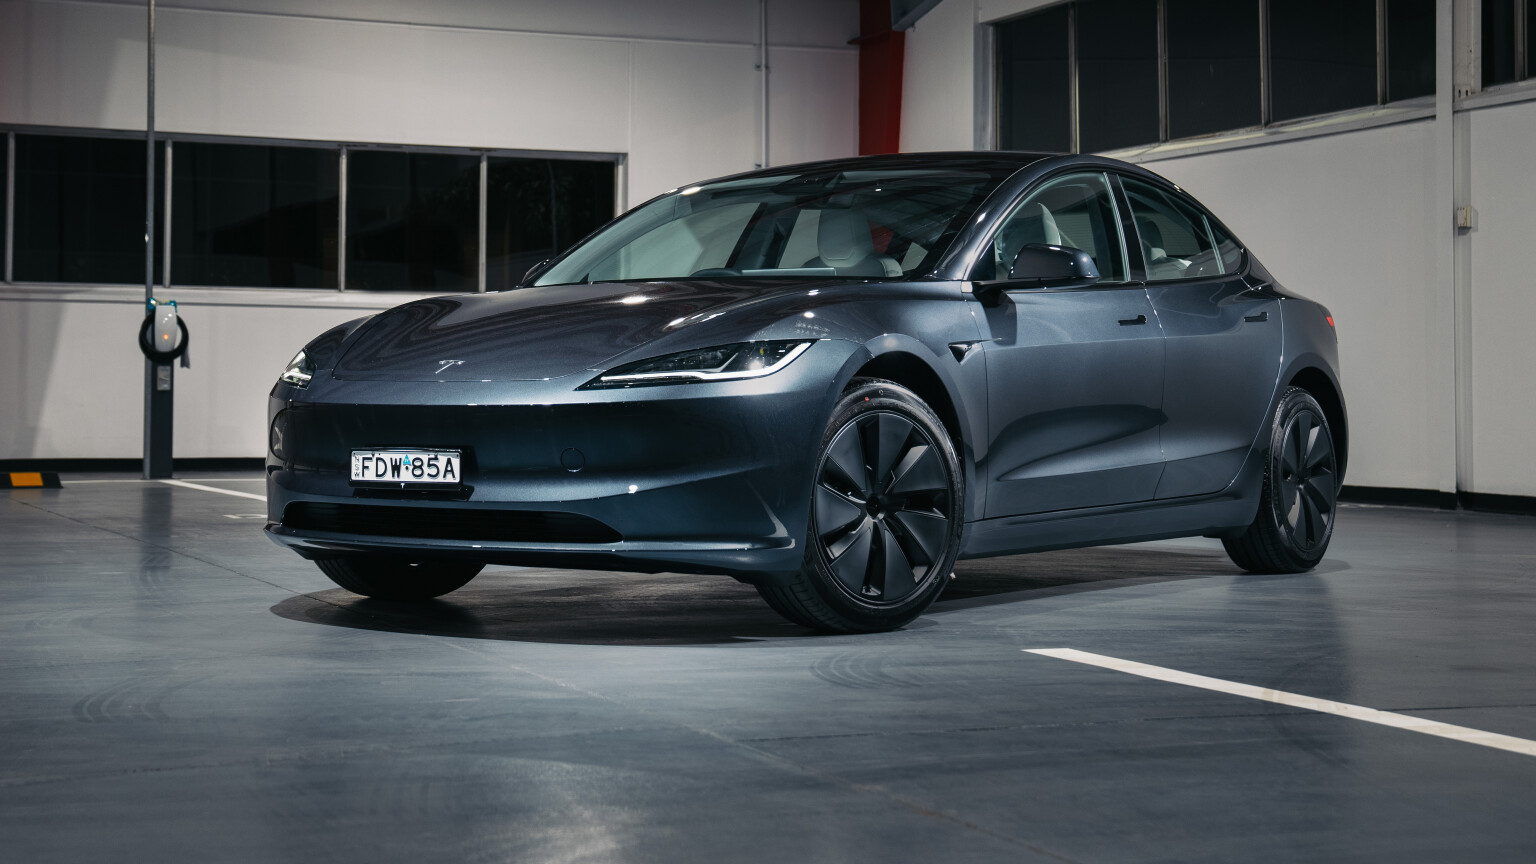 New Tesla Model 3 available to order now: carwow drives facelifted electric  car